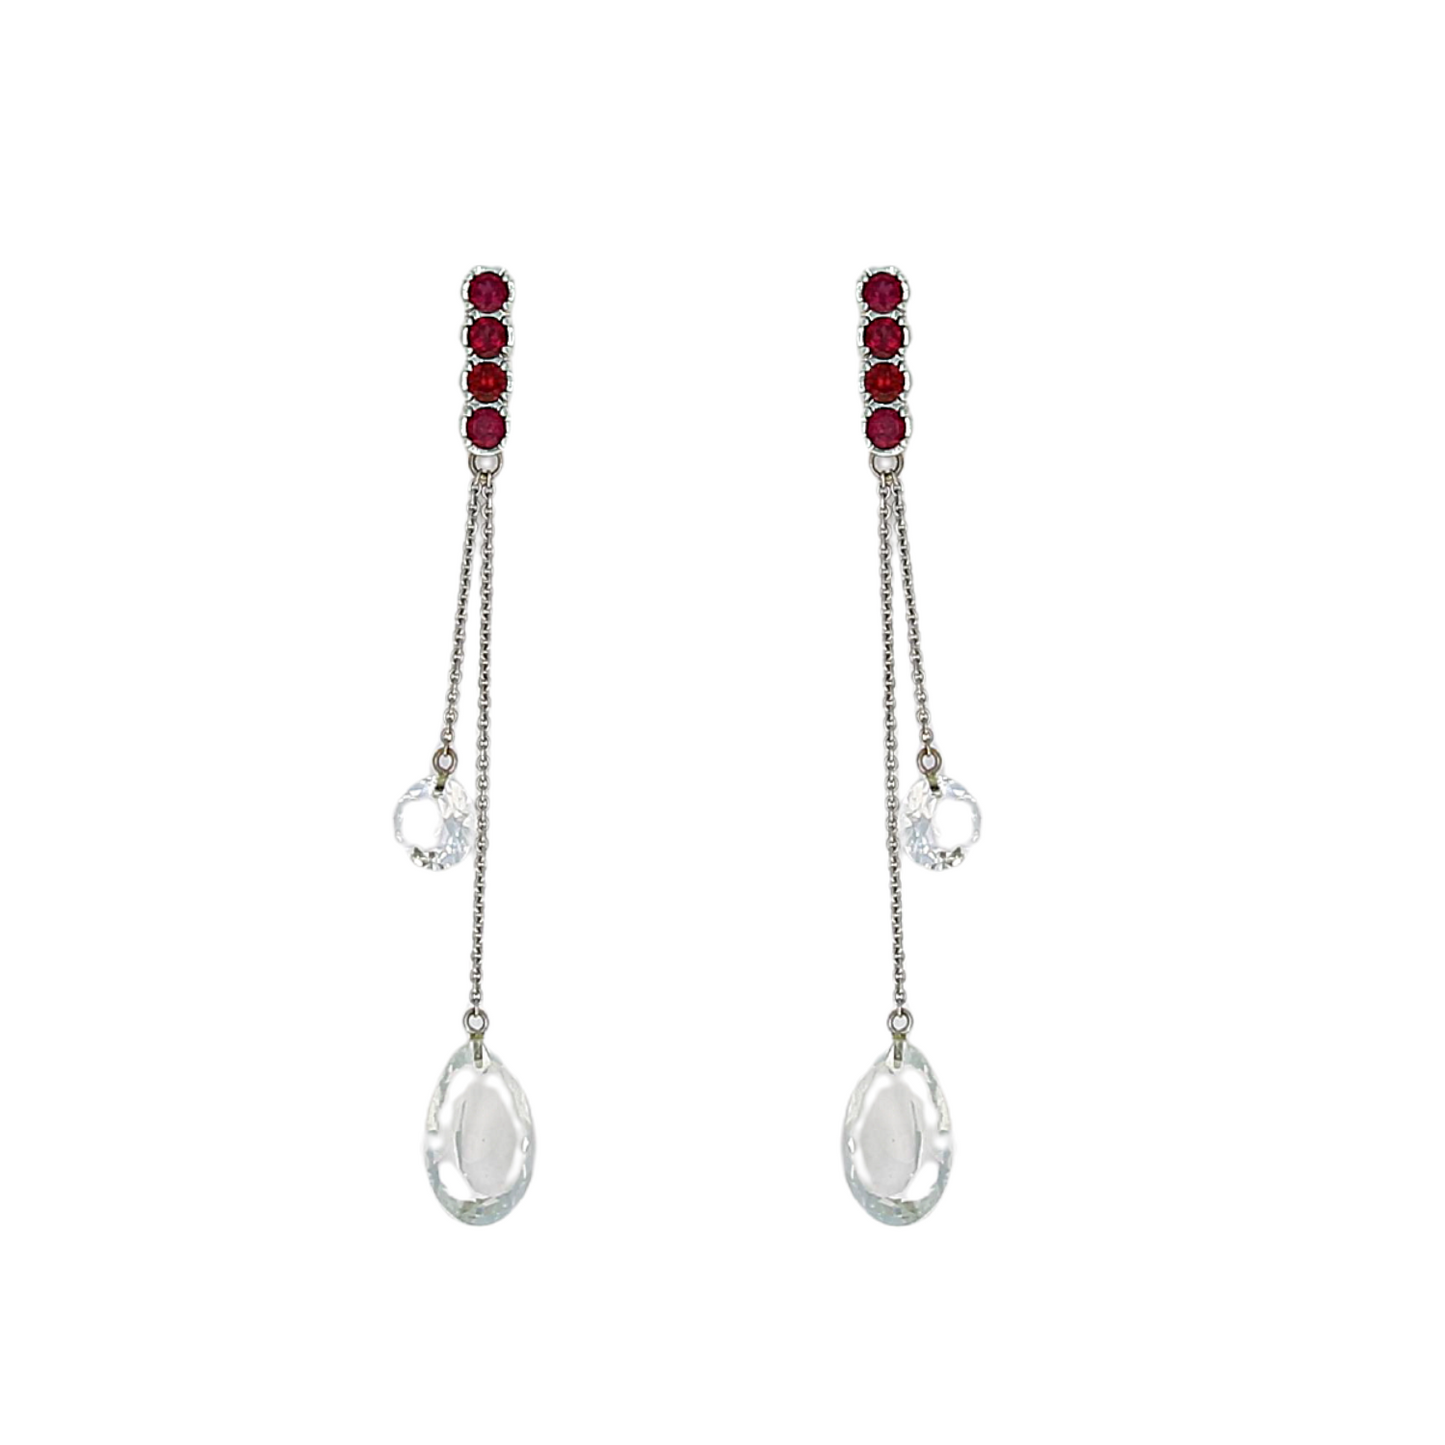 Madison Earrings with Rubies and Detachable White Topaz Drops